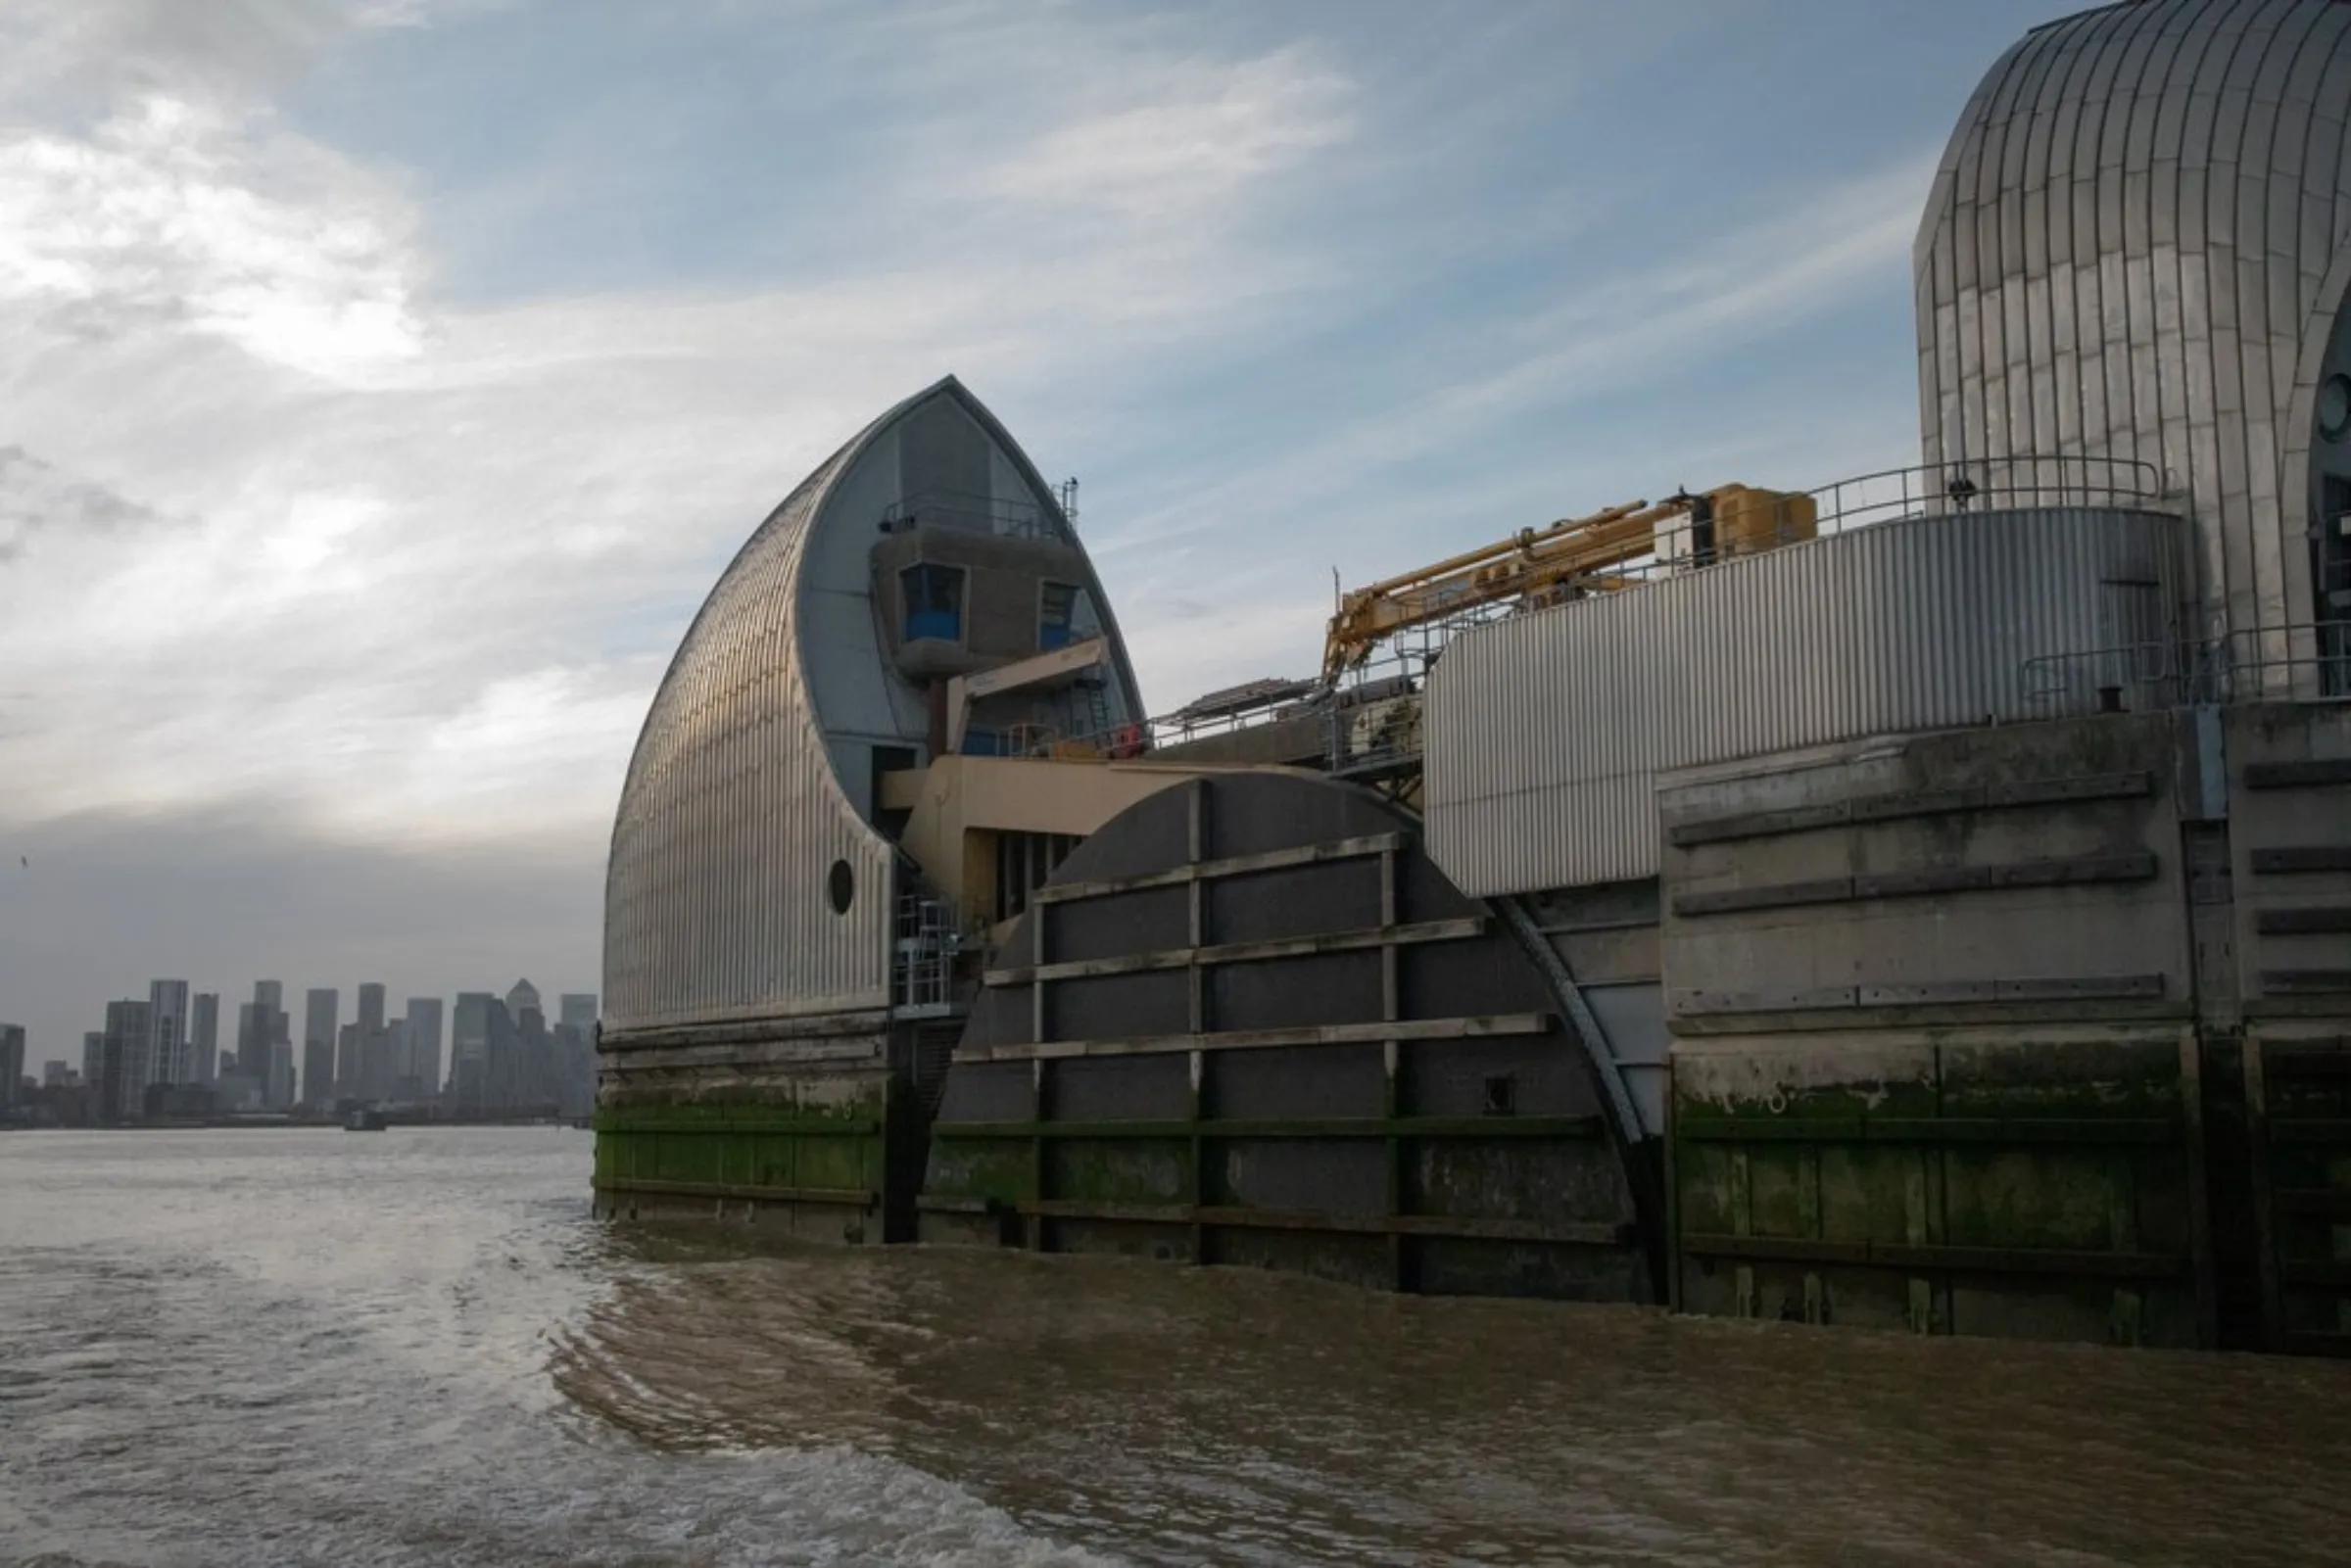 A view of the Thames Barrier, a set of floodwalls in east London that help protect the city from tidal surges, on October 21, 2021